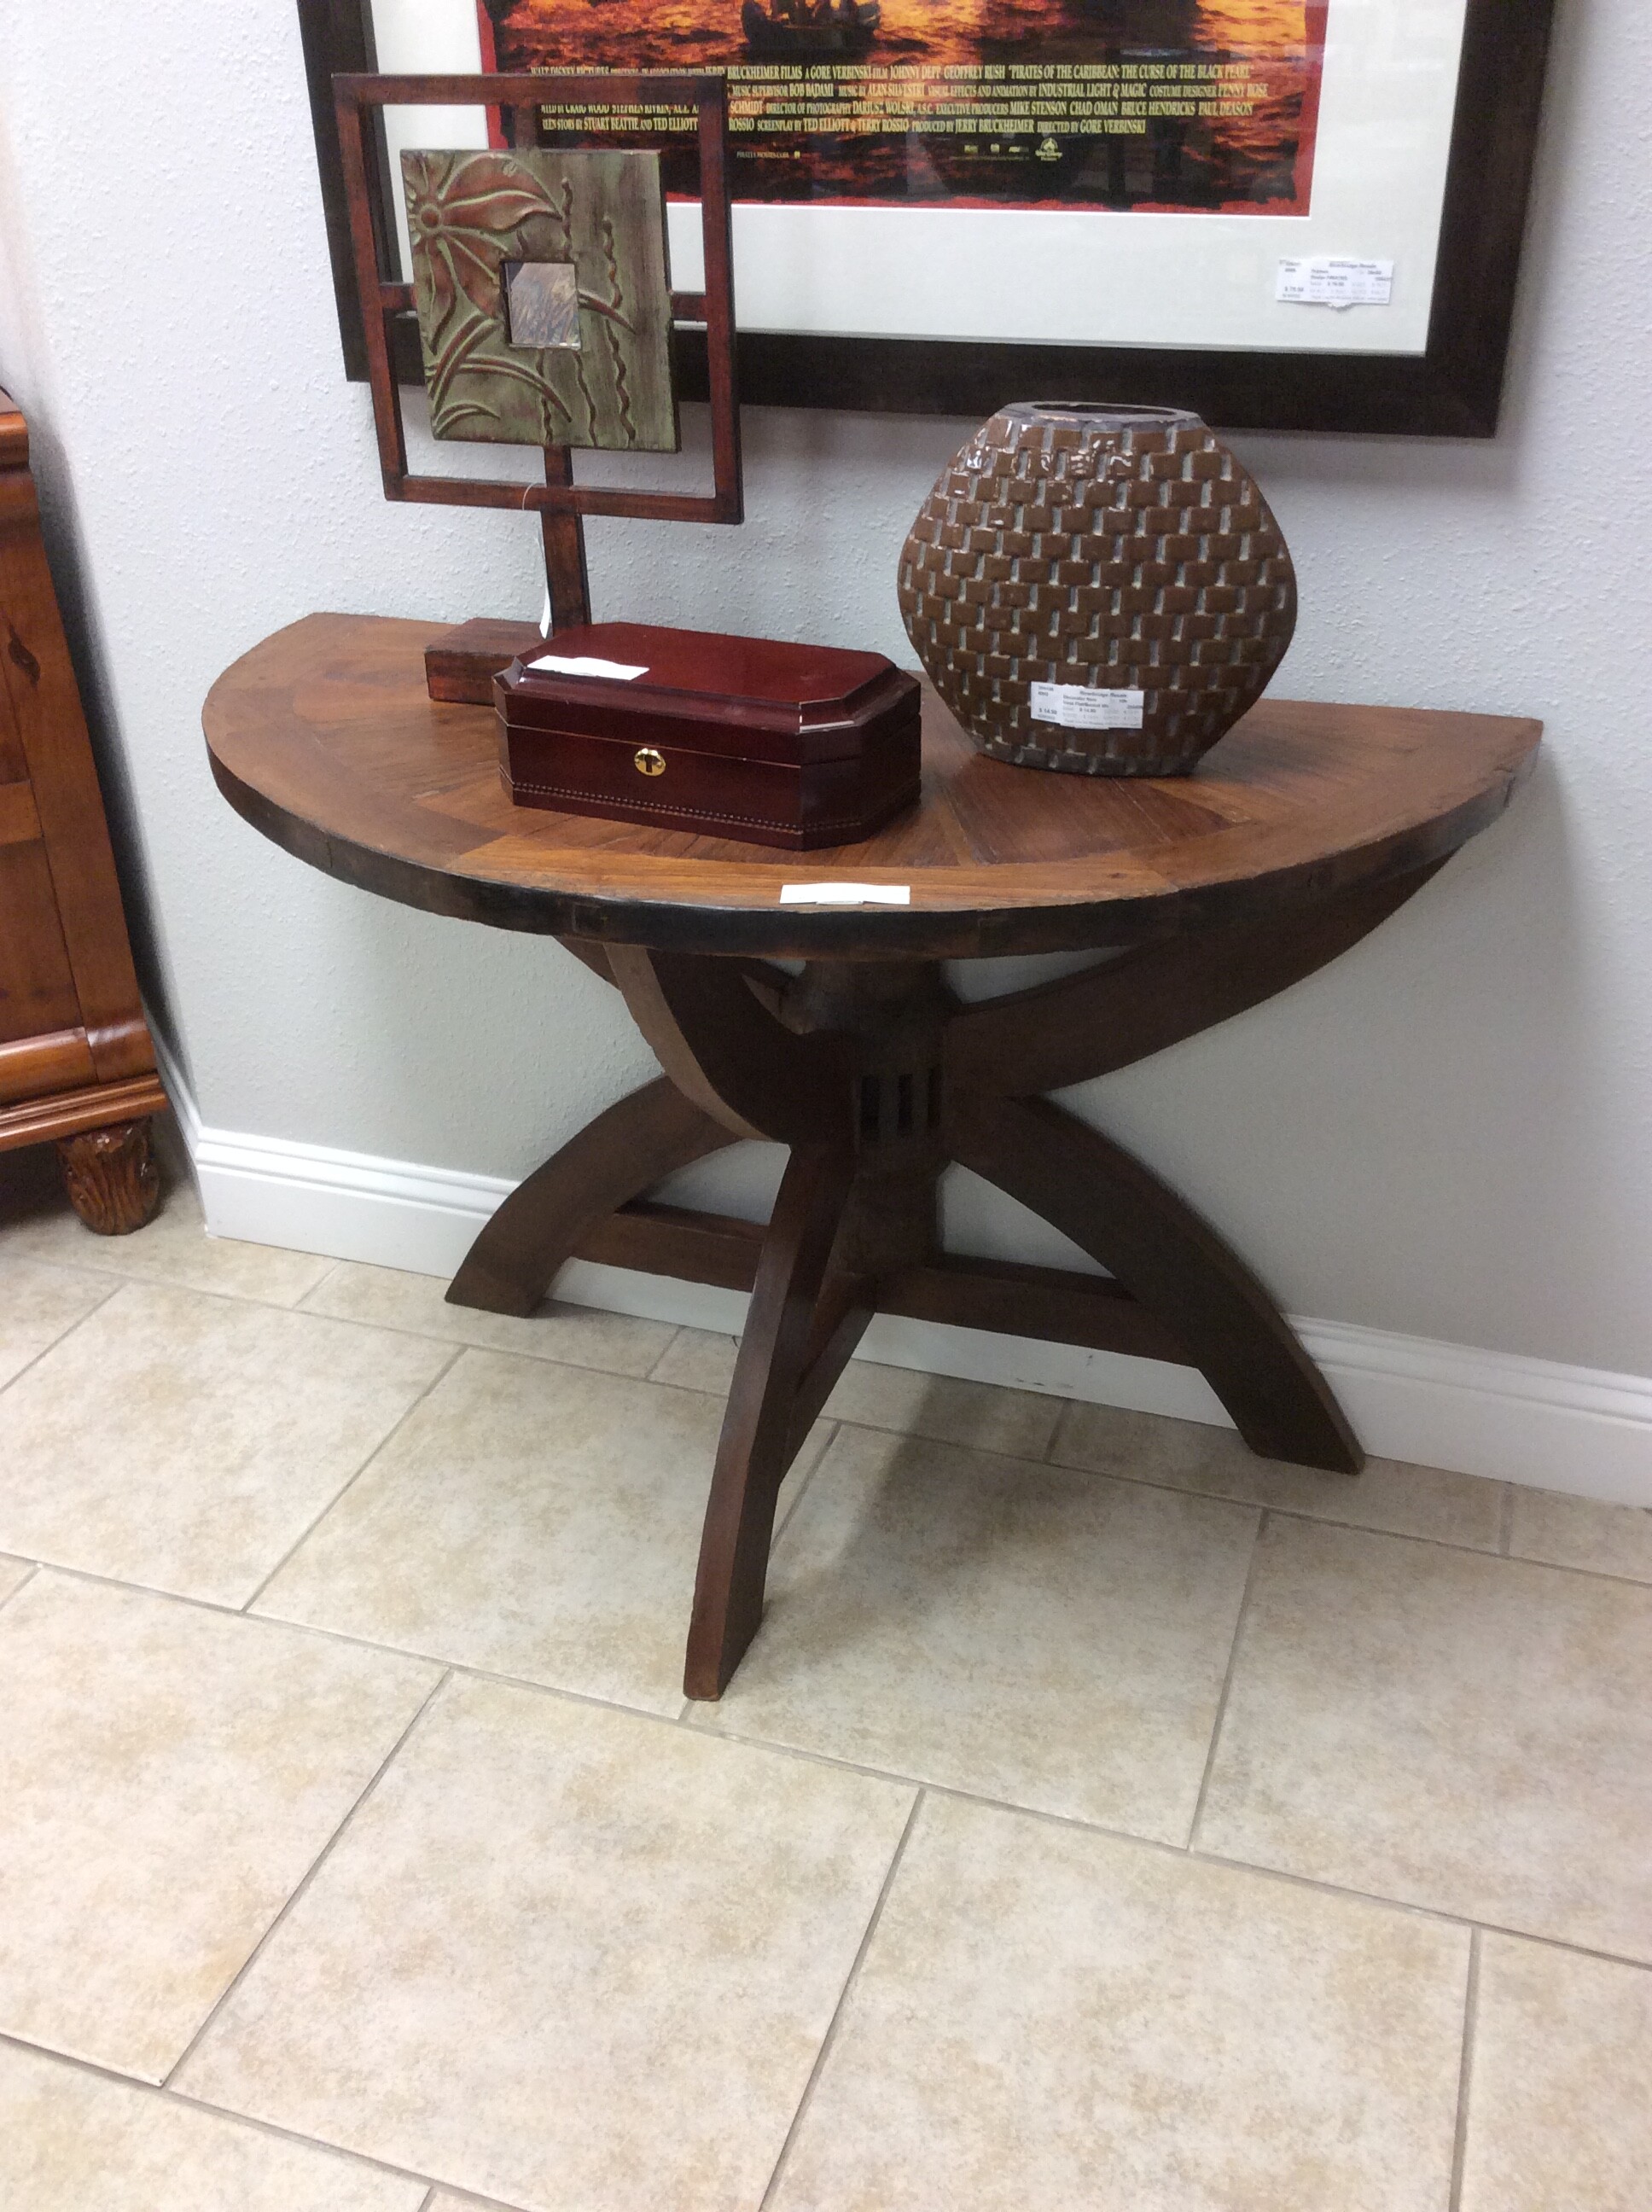 This rustic, one of a kind, semi circular table has an interesting repurposed column base in a dark wood finish. Great as an enrty table.